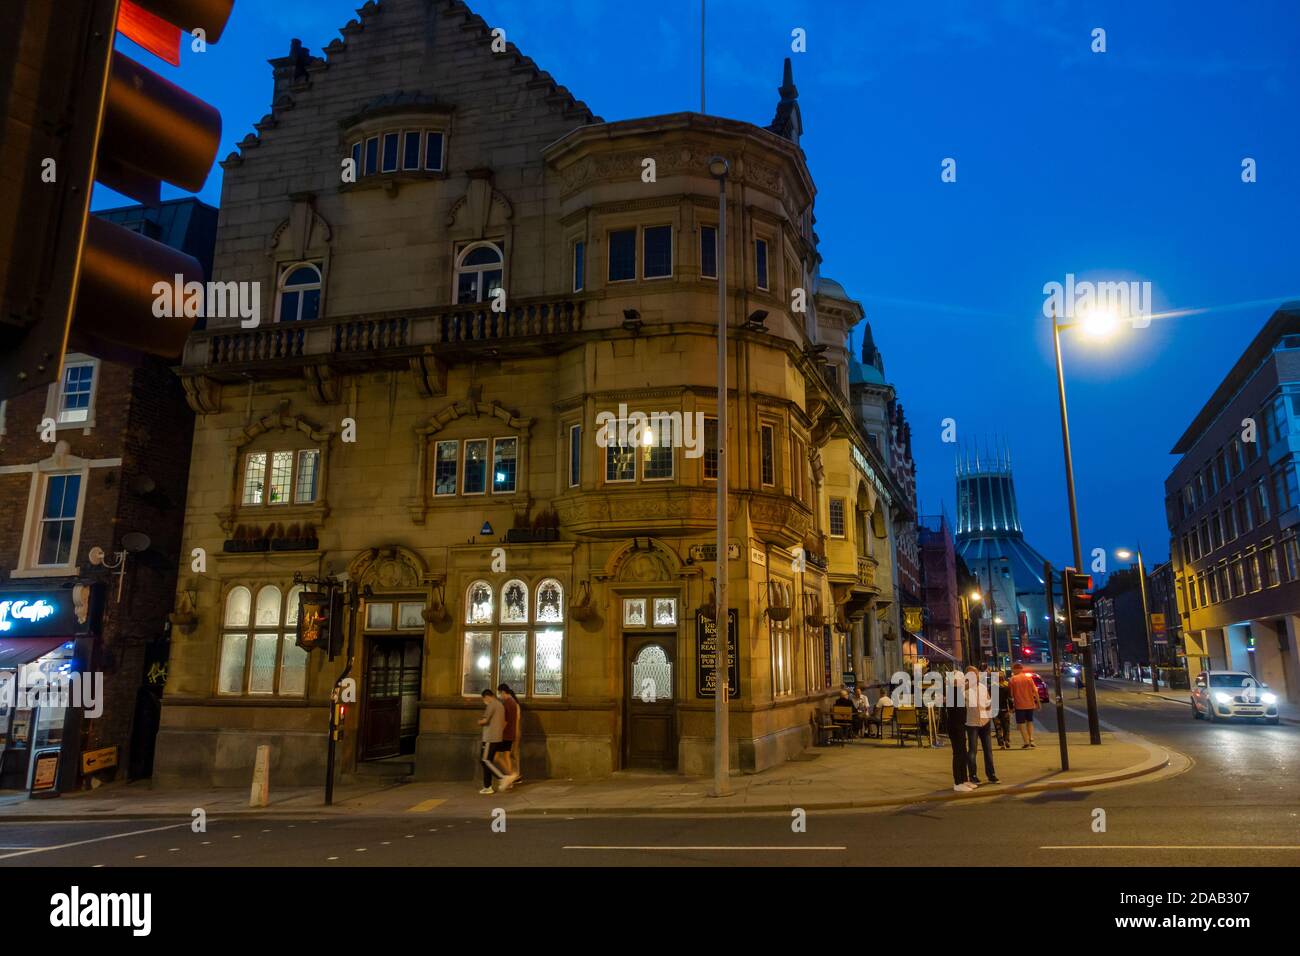 Night view of the Philharmonic Dining Rooms, a public house at the corner of Hope Street and Hardman Street in Liverpool, England, UK Stock Photo